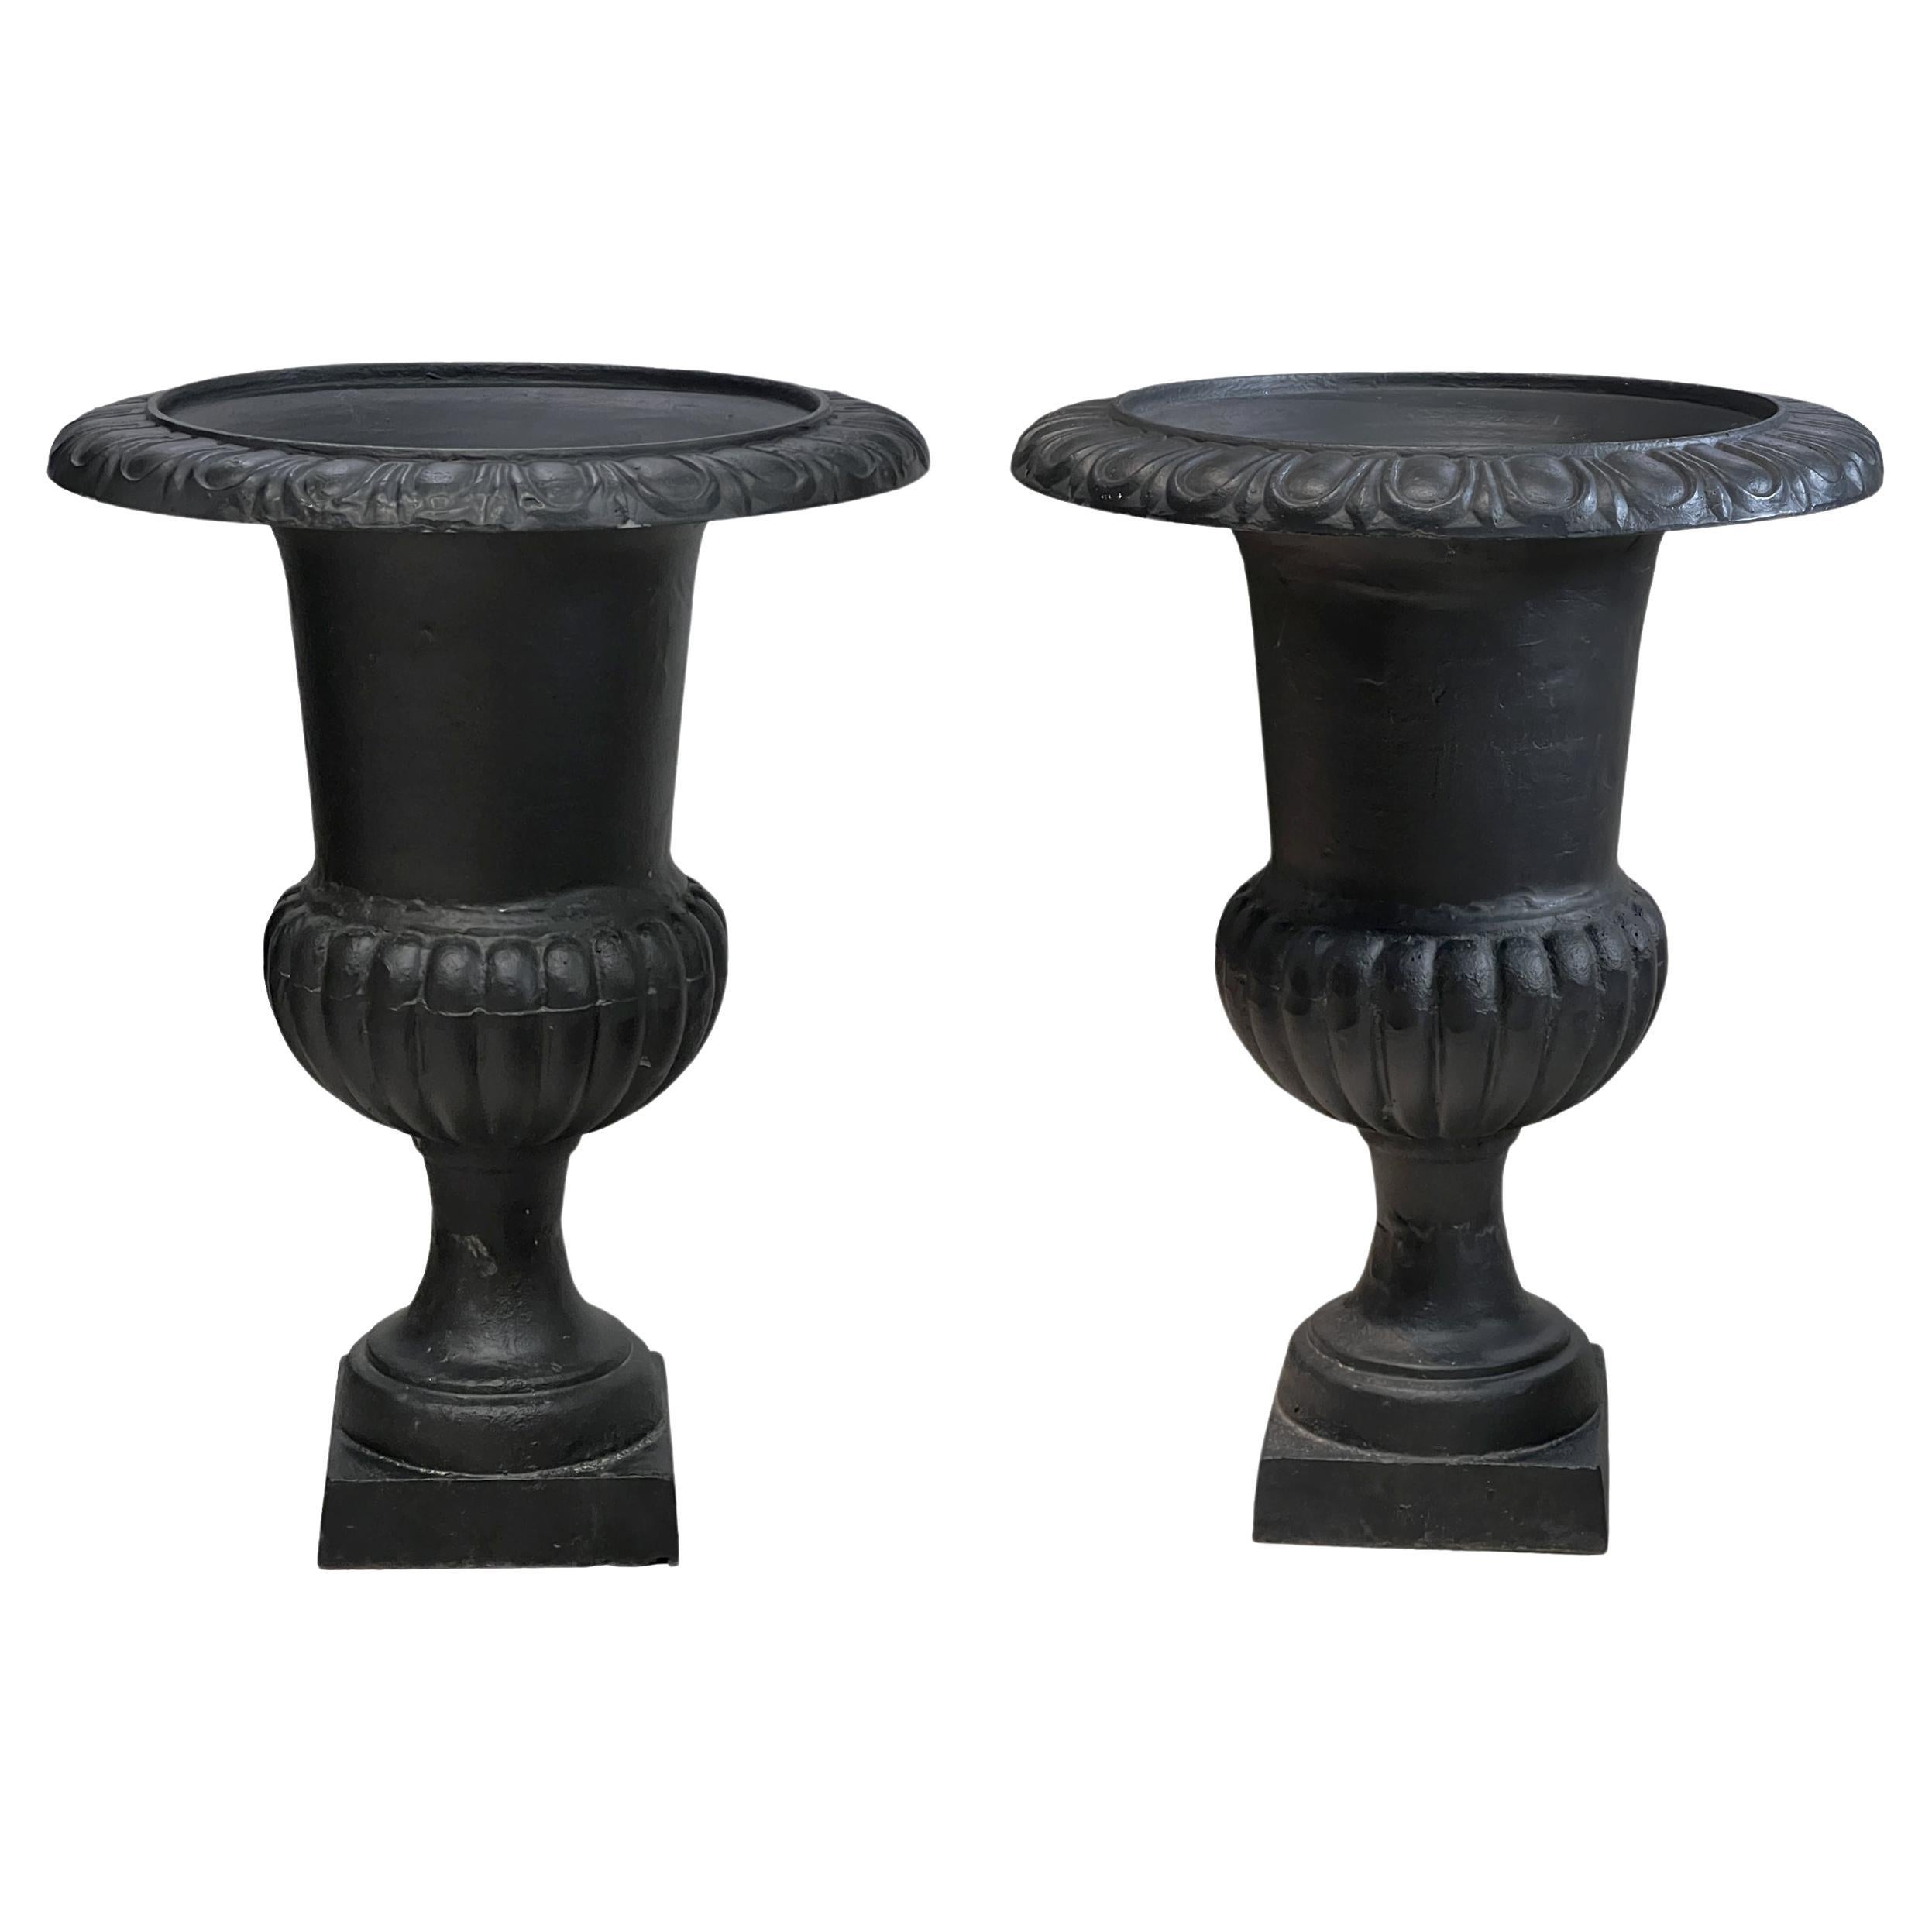 French Neoclassical-Style Large Cast Iron Garden Urns or Planters, Set of 2 For Sale